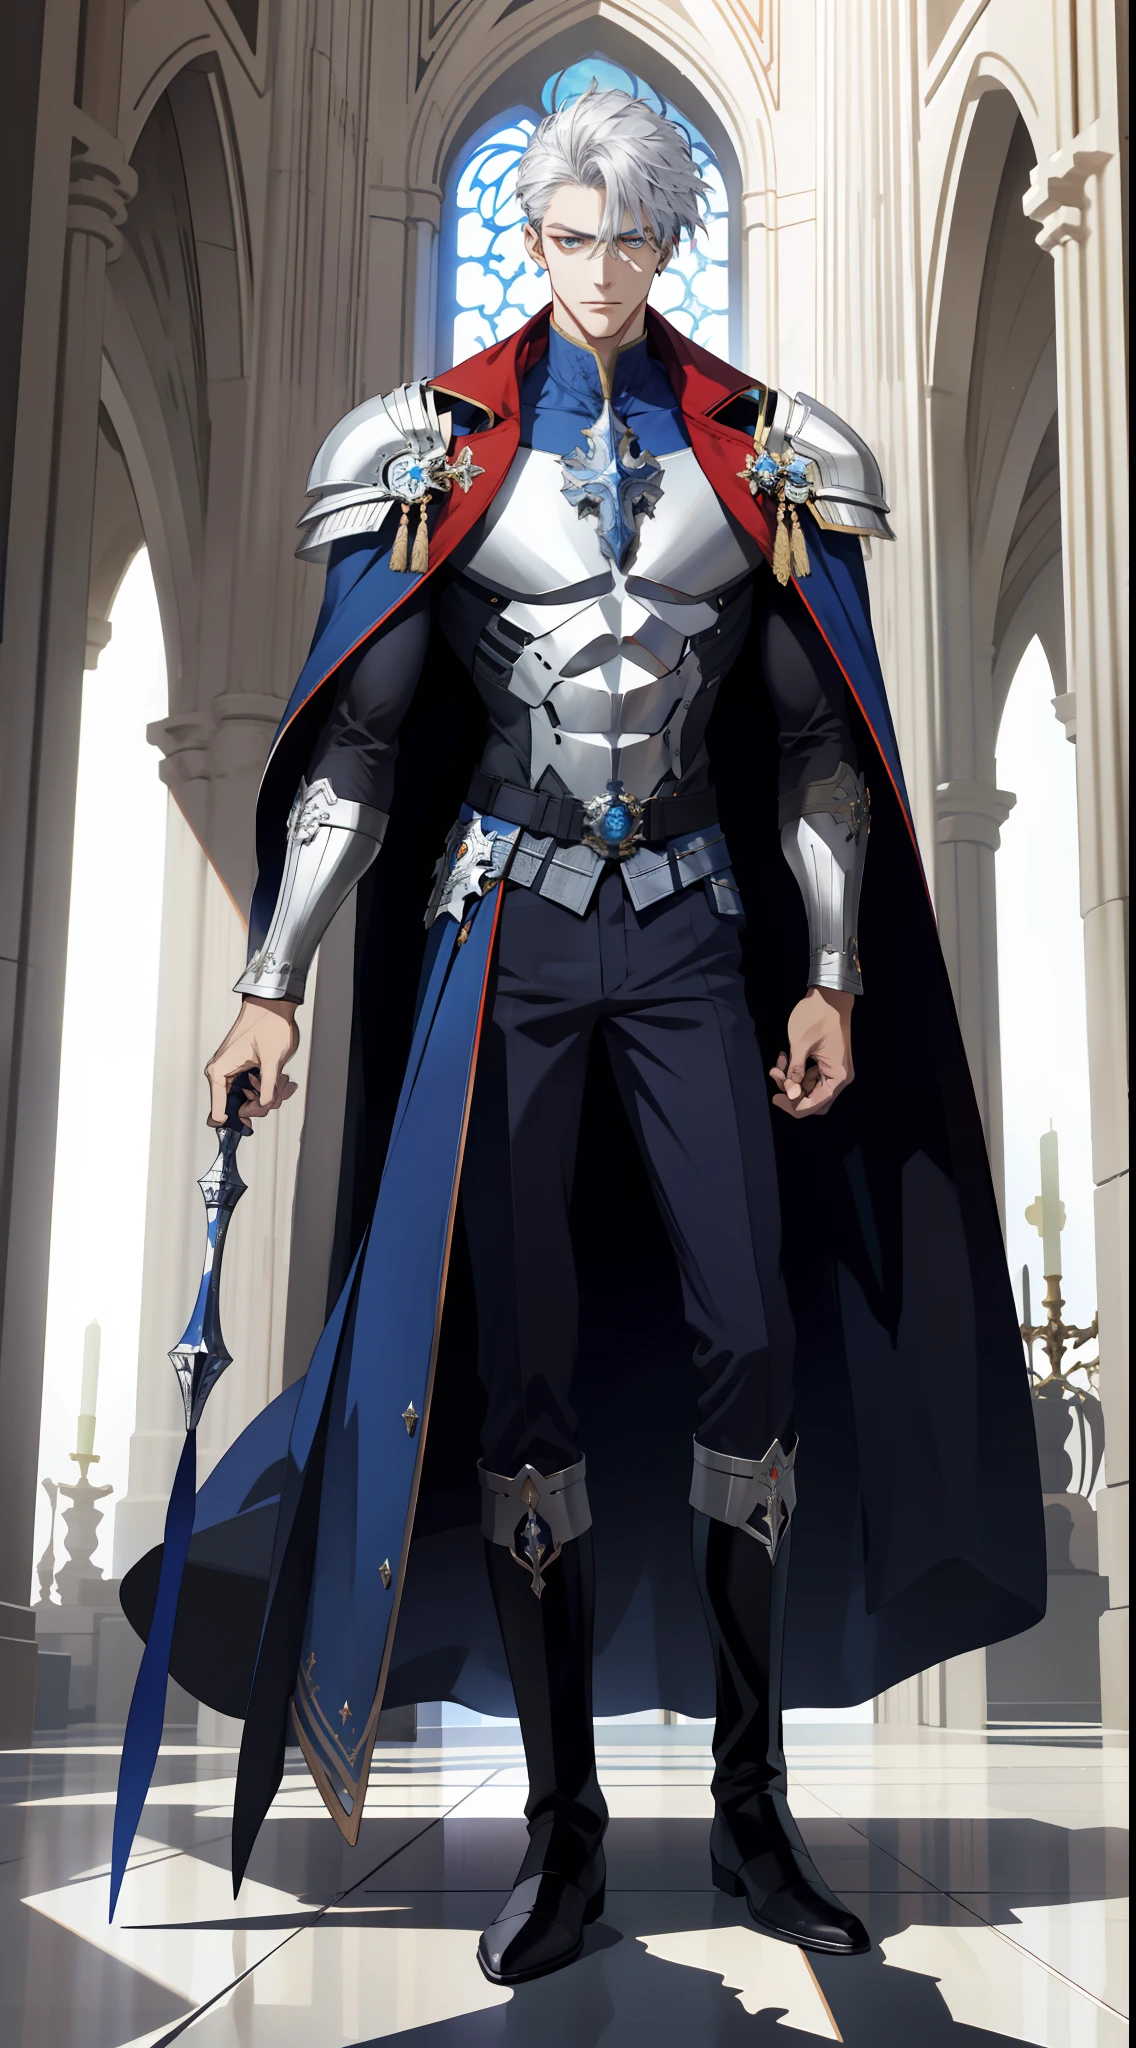 （absurderes，A high resolution，ultra - detailed），1male people，AS-Adult，handsome，Tall muscular man，a broad shouldered，Fine and detailed eyes and detailed face，blond hairbl，cavalier，Blue-silver heavy armor，Red cape，Blue helmet，Black boots，Black pantsuit，sankta，cathedrals，religion，exalted，battlefiled，standing on your feet，Full body photo